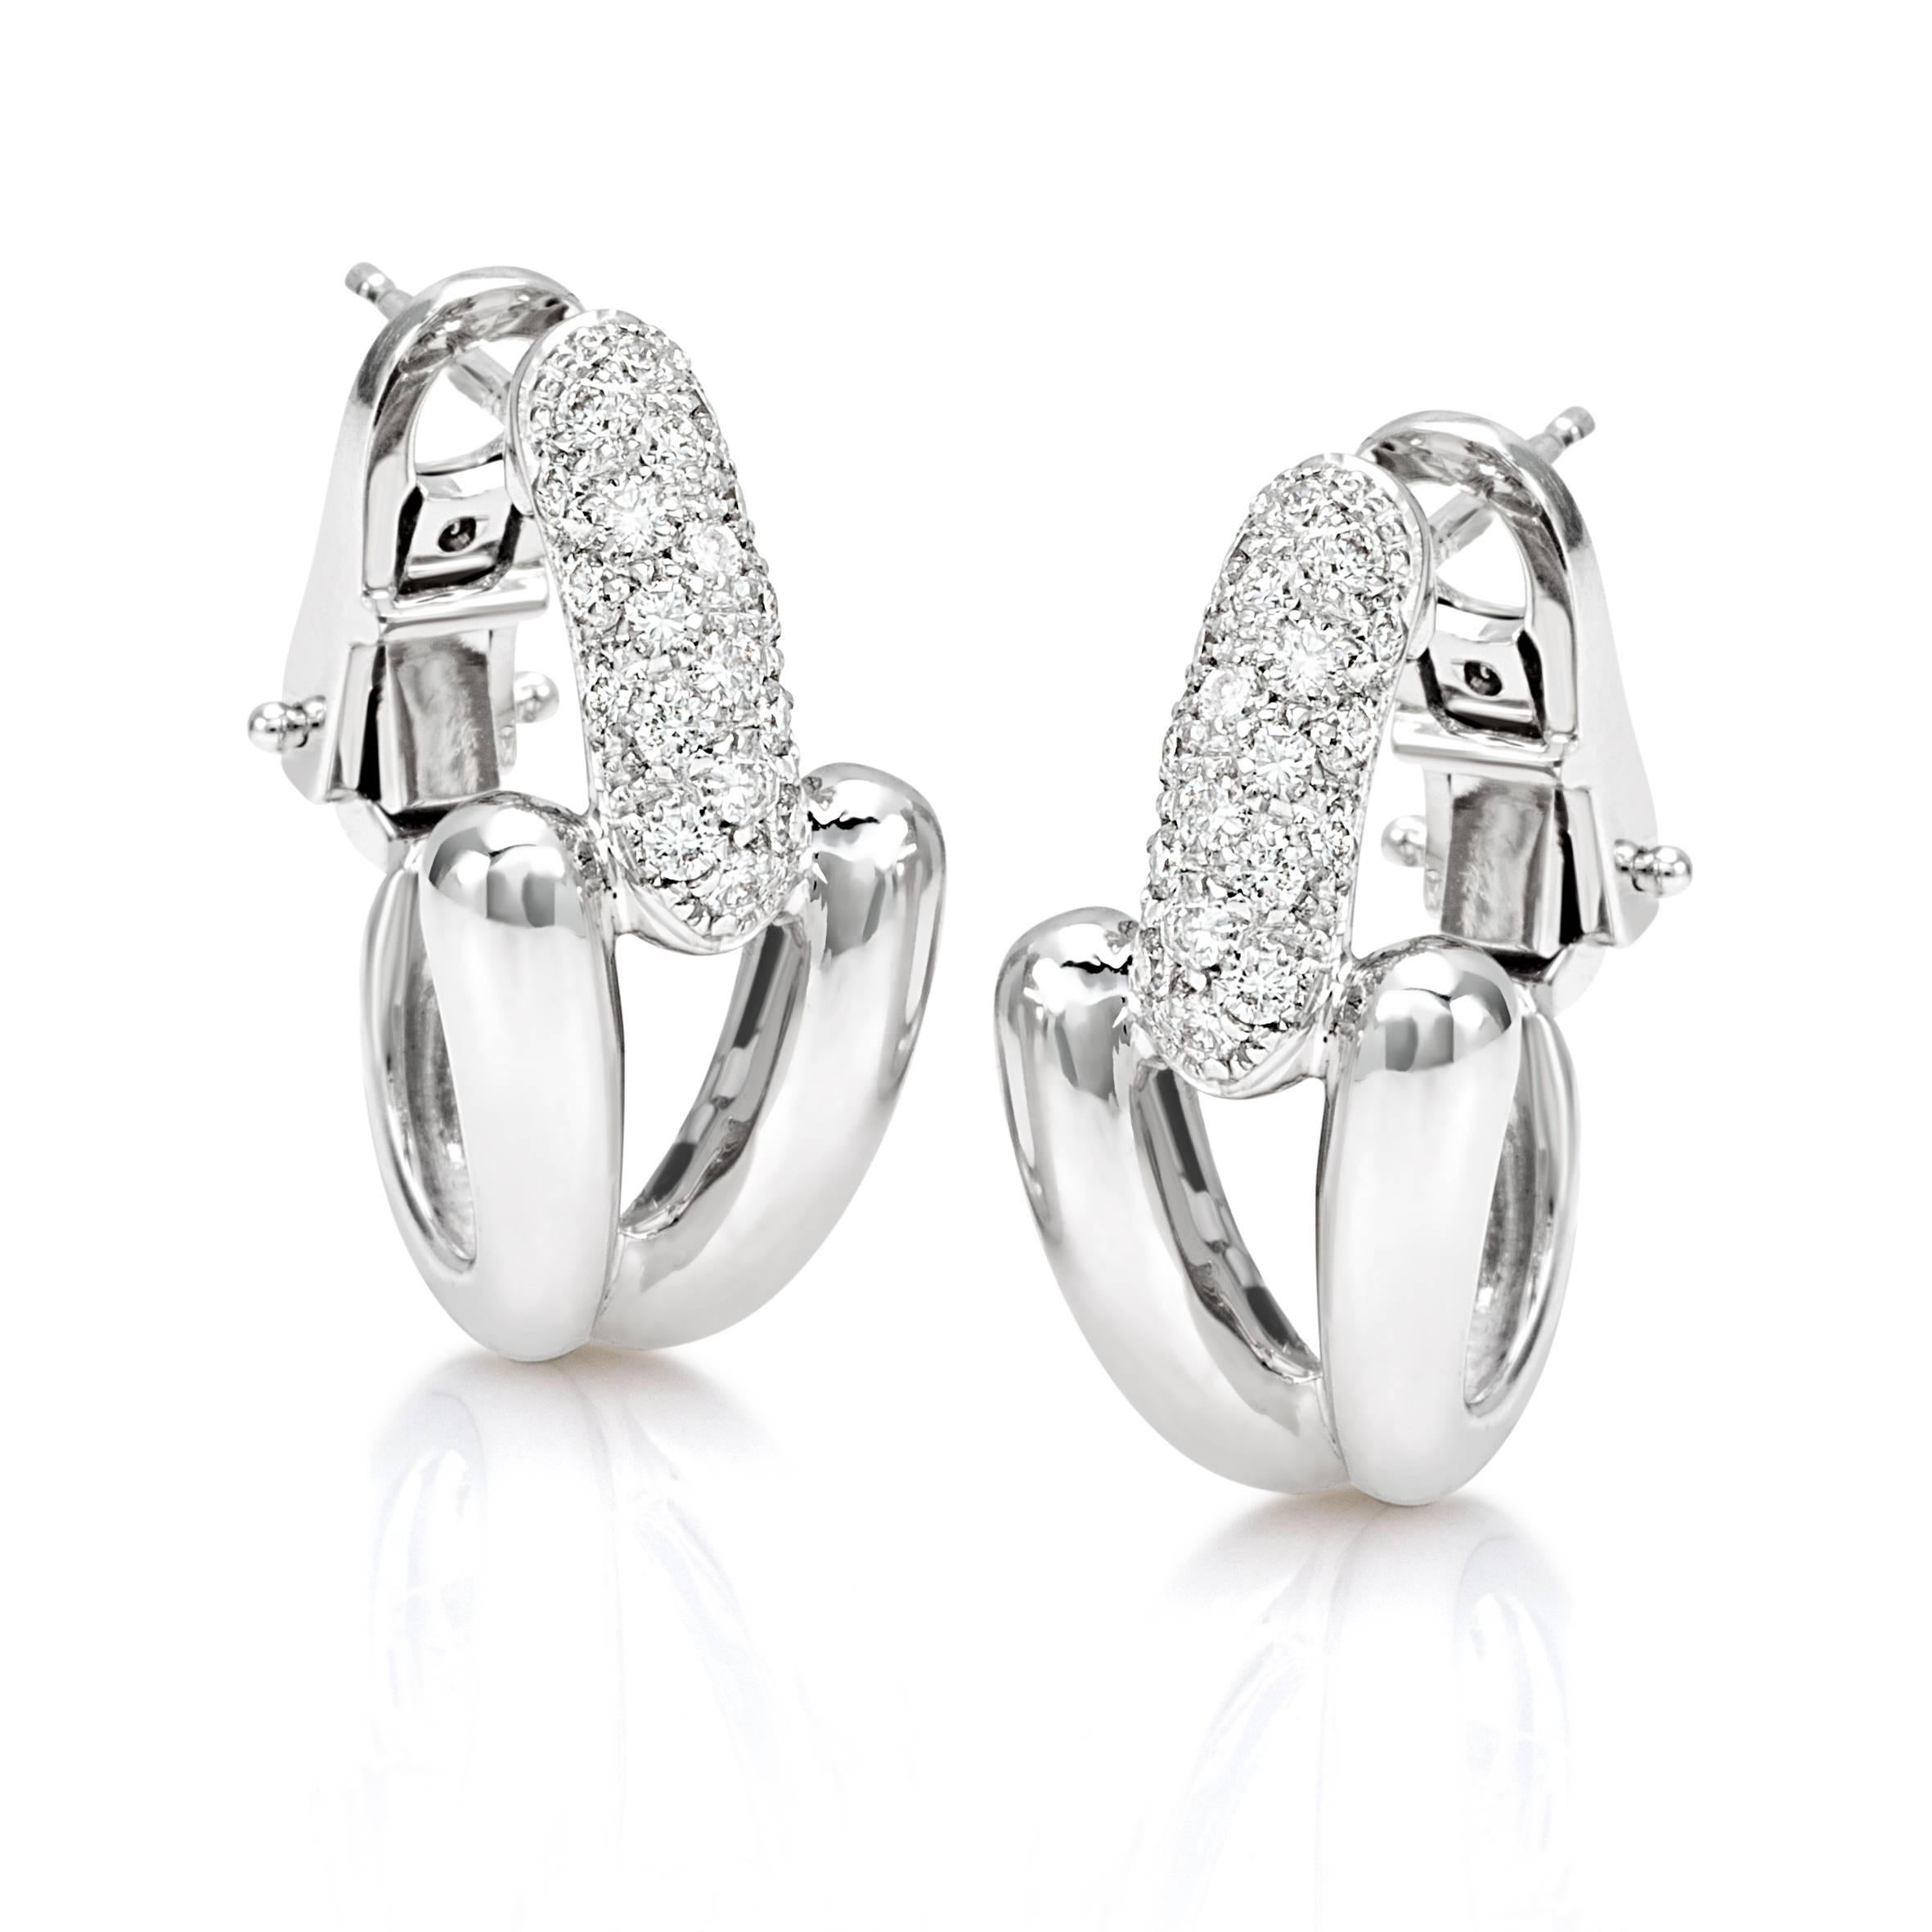 Roberta collection pair of earrigns in 18 kt  white gold and white diamonds 
The newest and more popular collection of his year

the total weight of the gold is  gr 10.80
the total weight of the white diamonds is ct 0.58 - color GH clarity